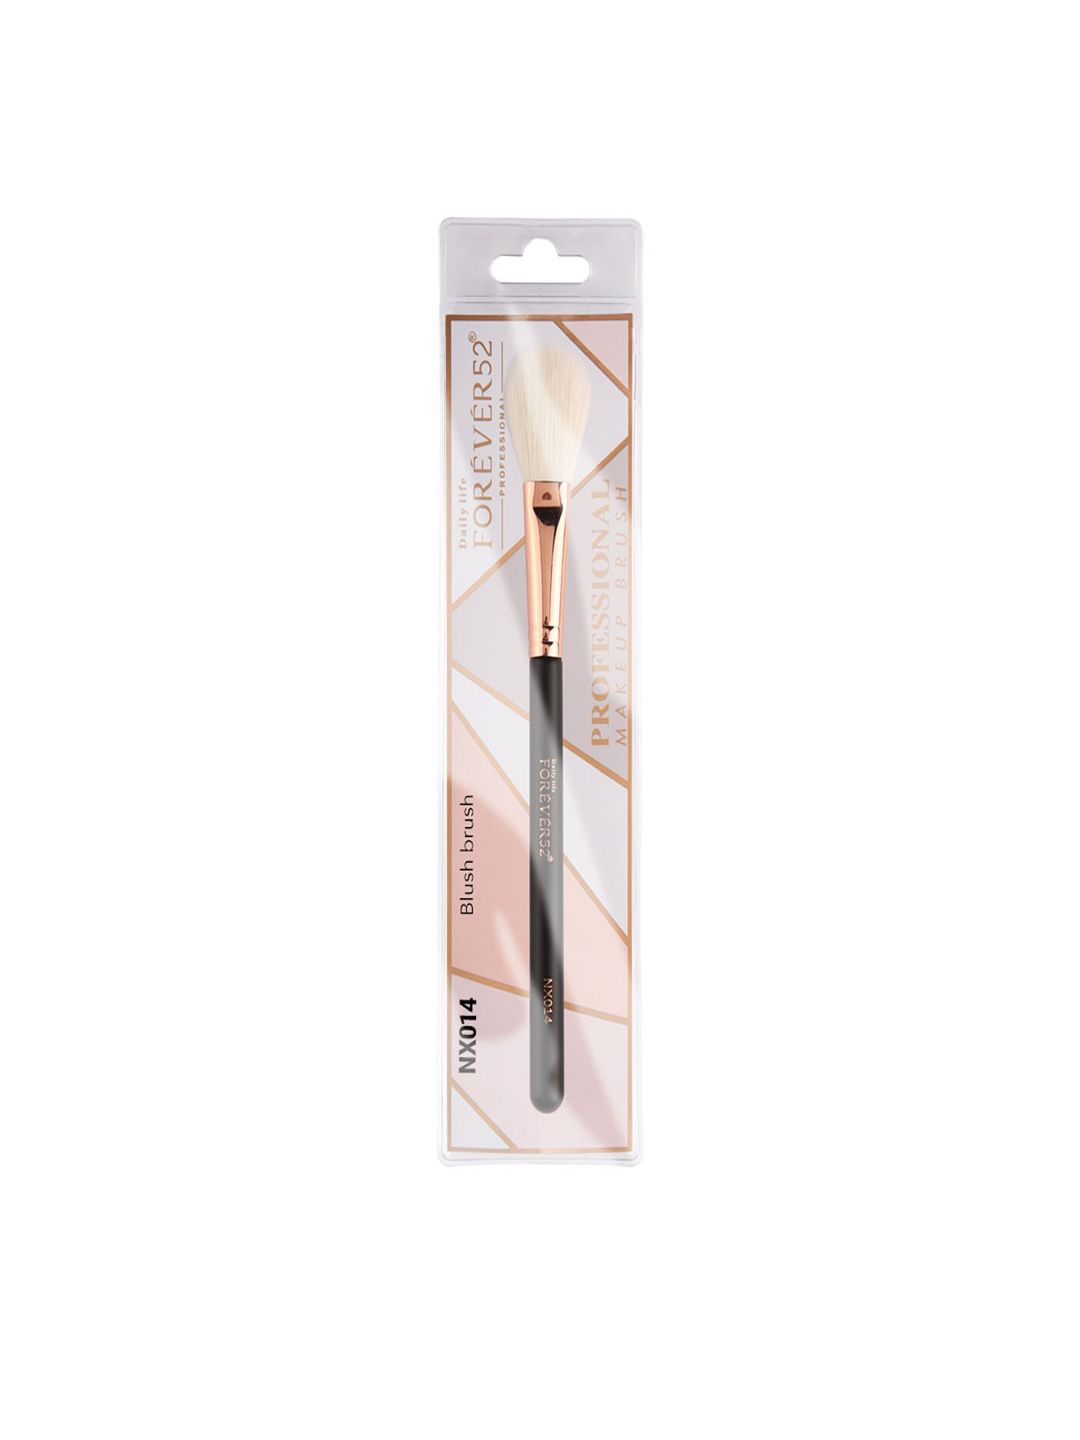 Daily Life Forever52 Blush brush NX014 Price in India